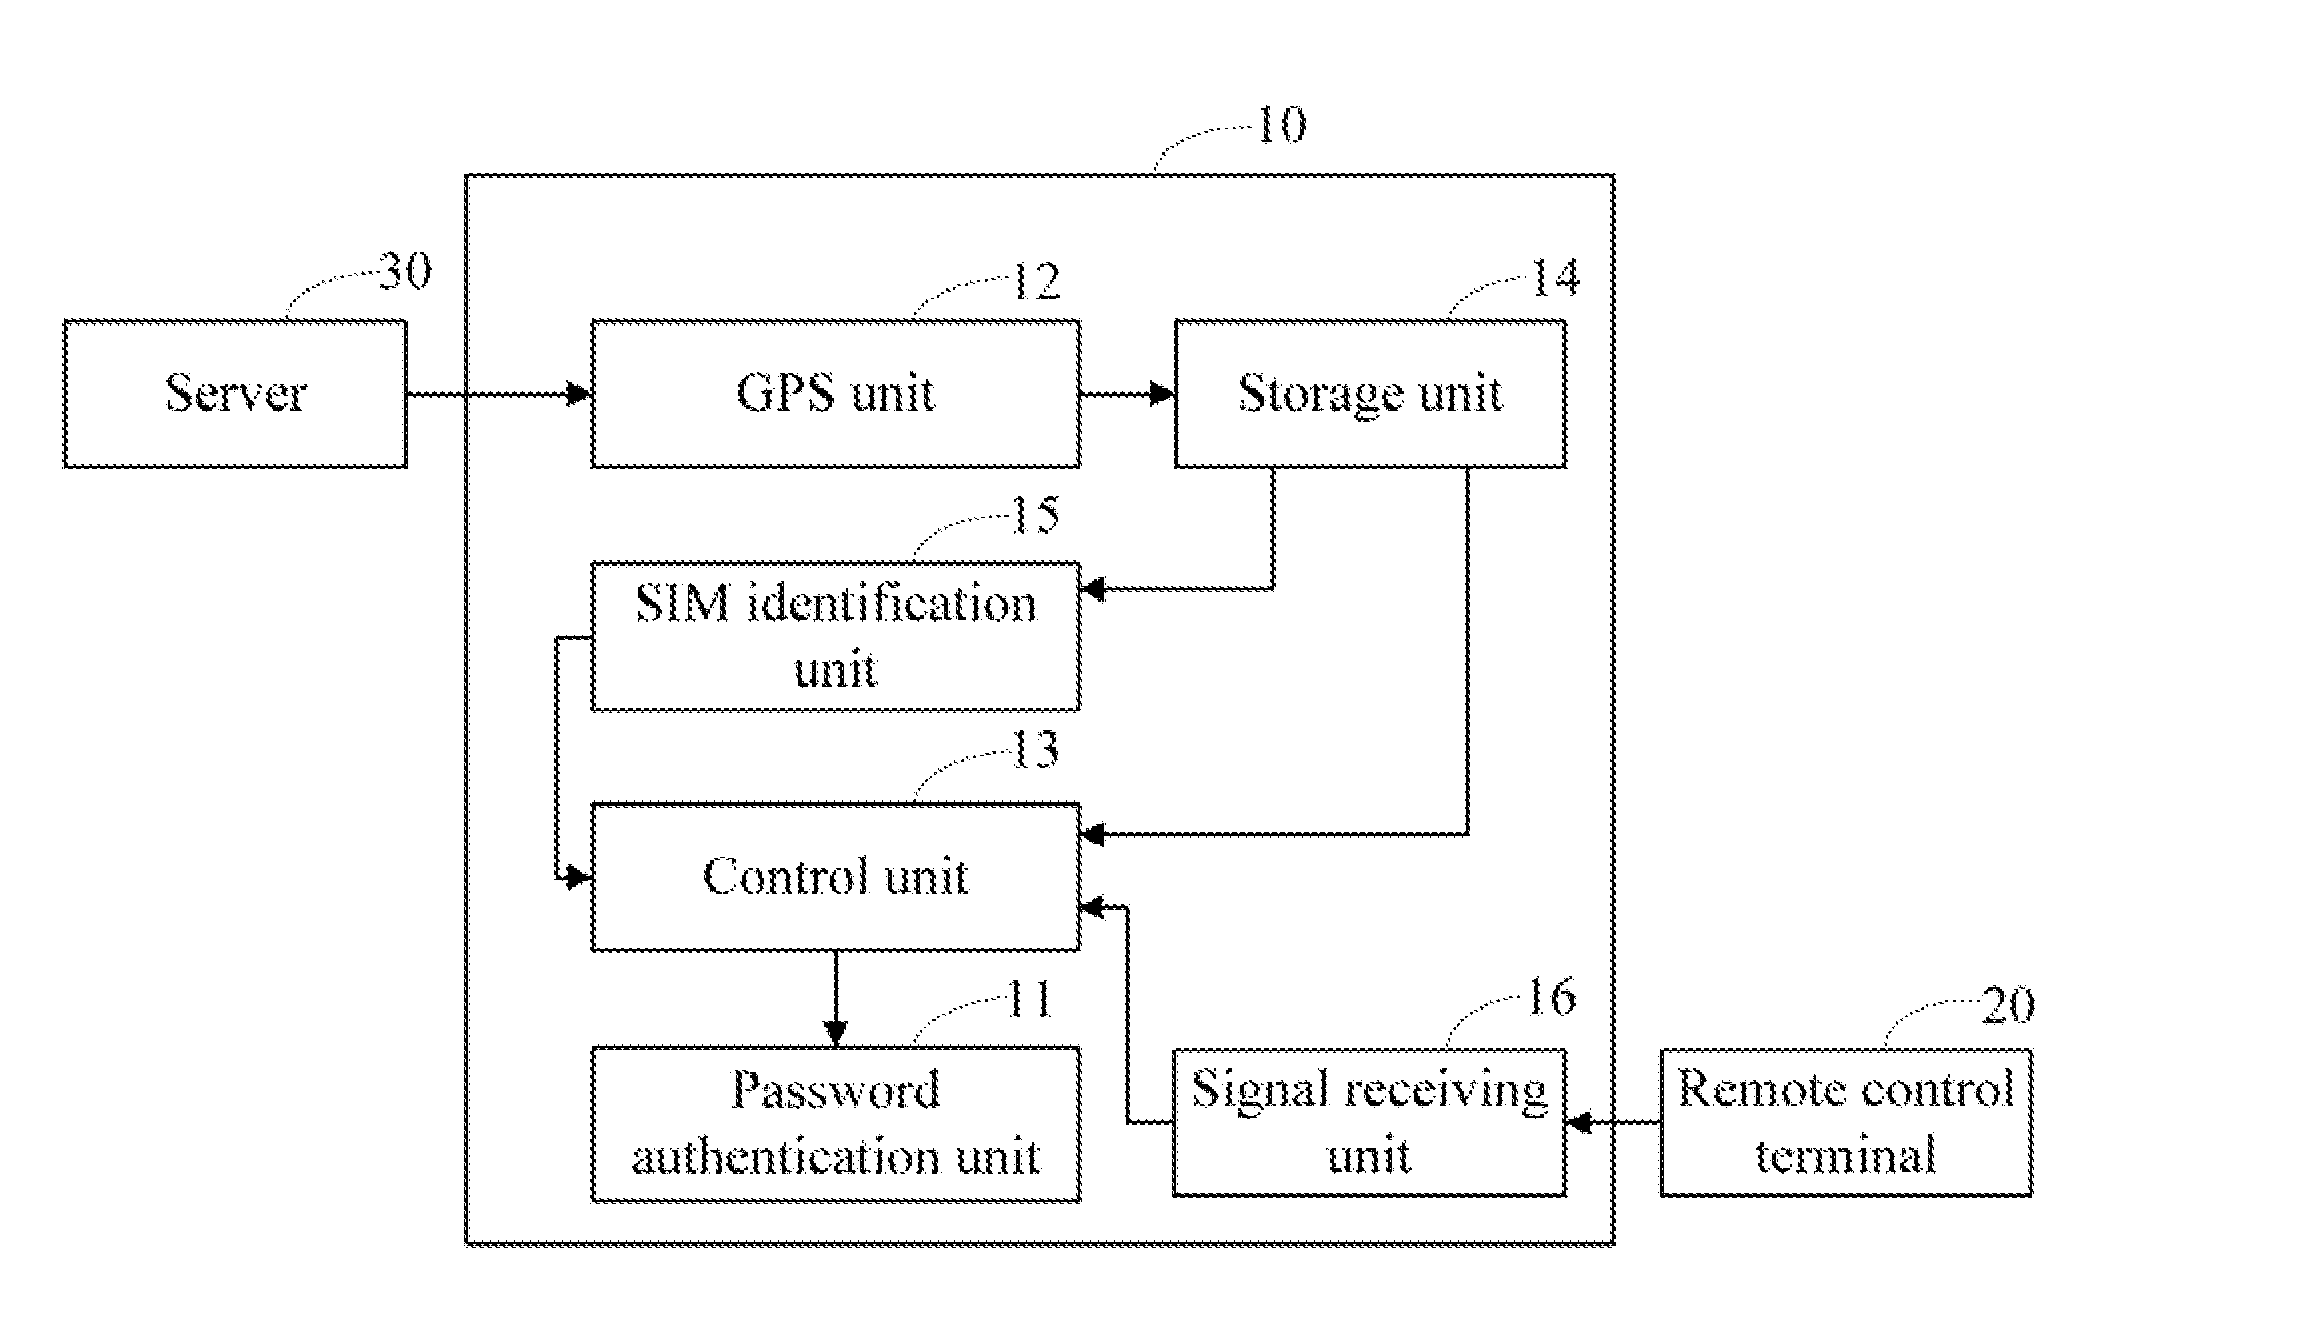 Apparatus for deleting personal data stored in portable electronic device